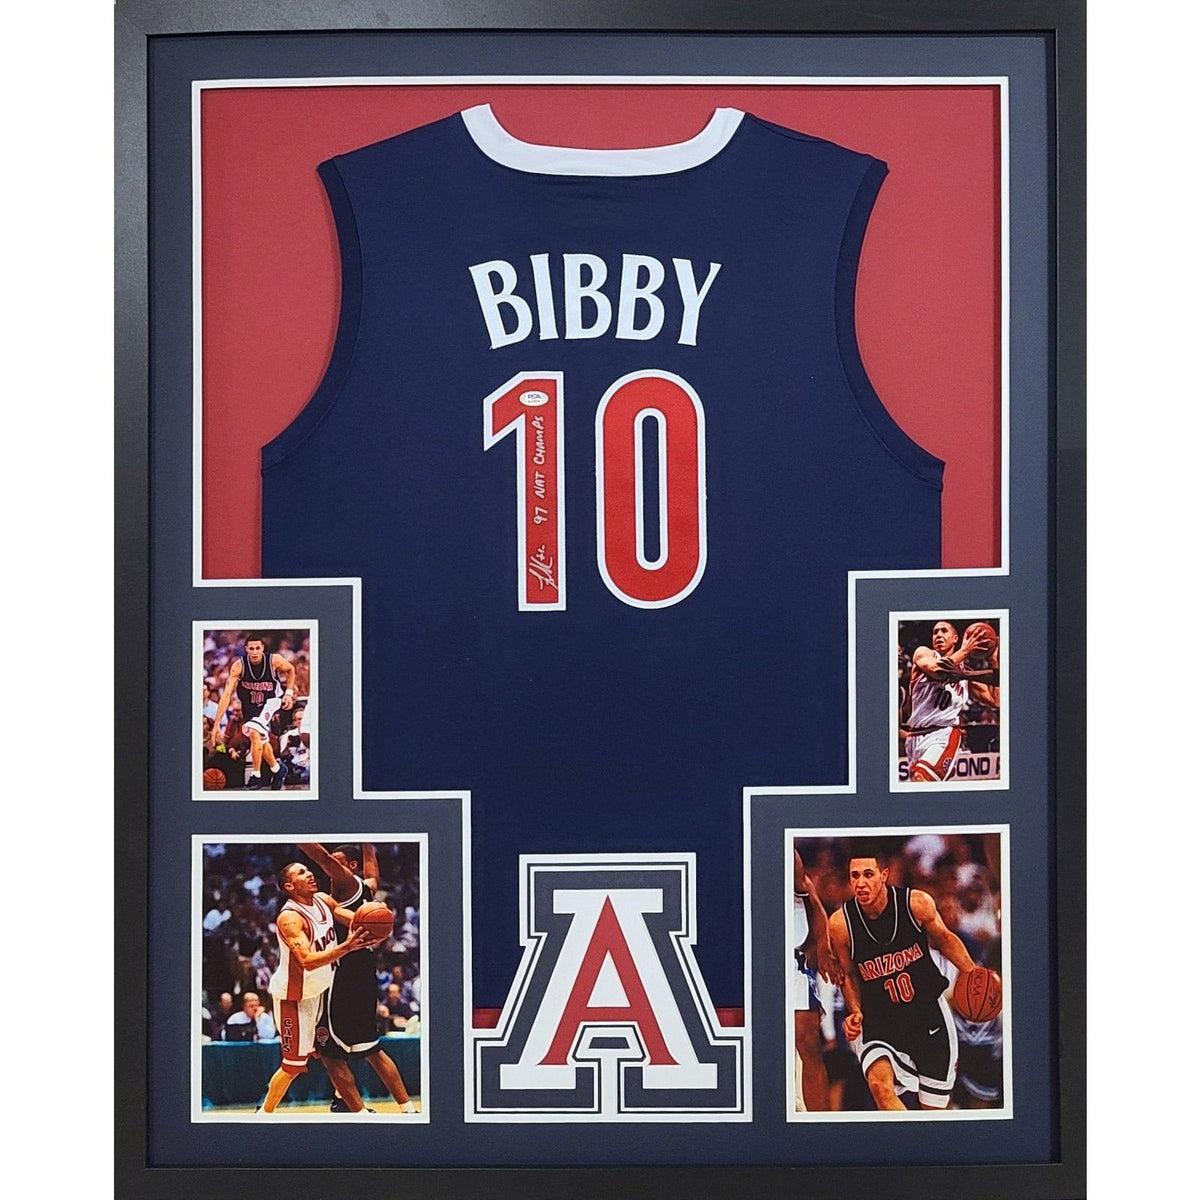 Mike Bibby Framed Jersey PSA/DNA Autographed Signed Arizona Wildcats